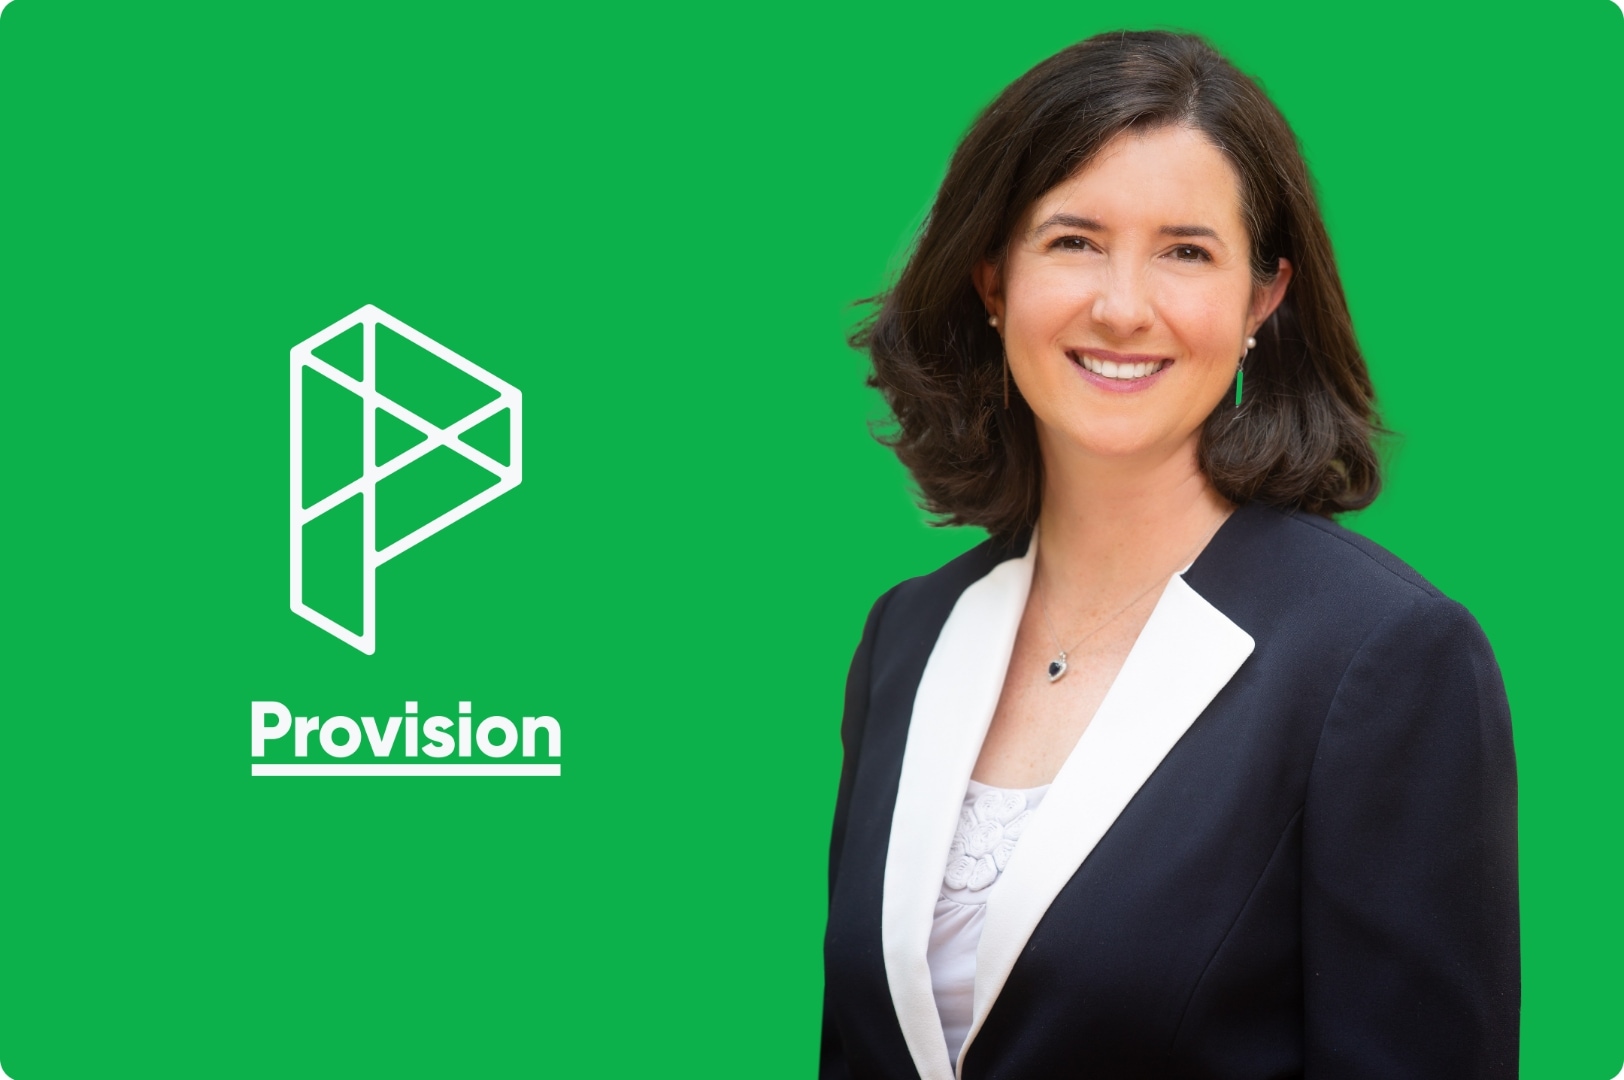 pic-woman-smiling-in-front-of-provision-logo-1624x1080